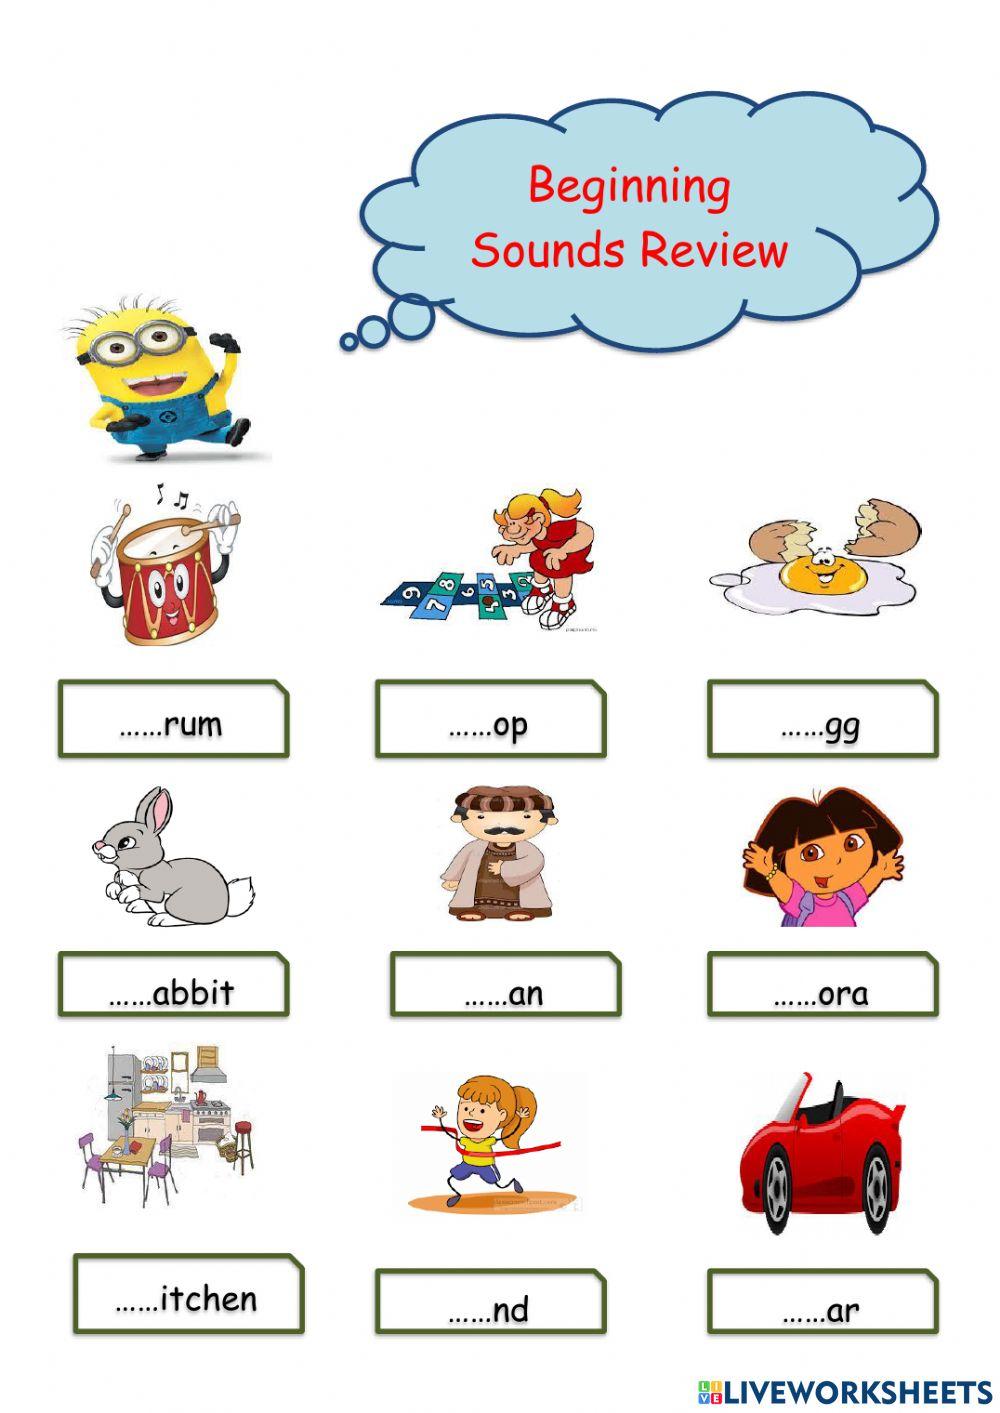 Sounds review group 2